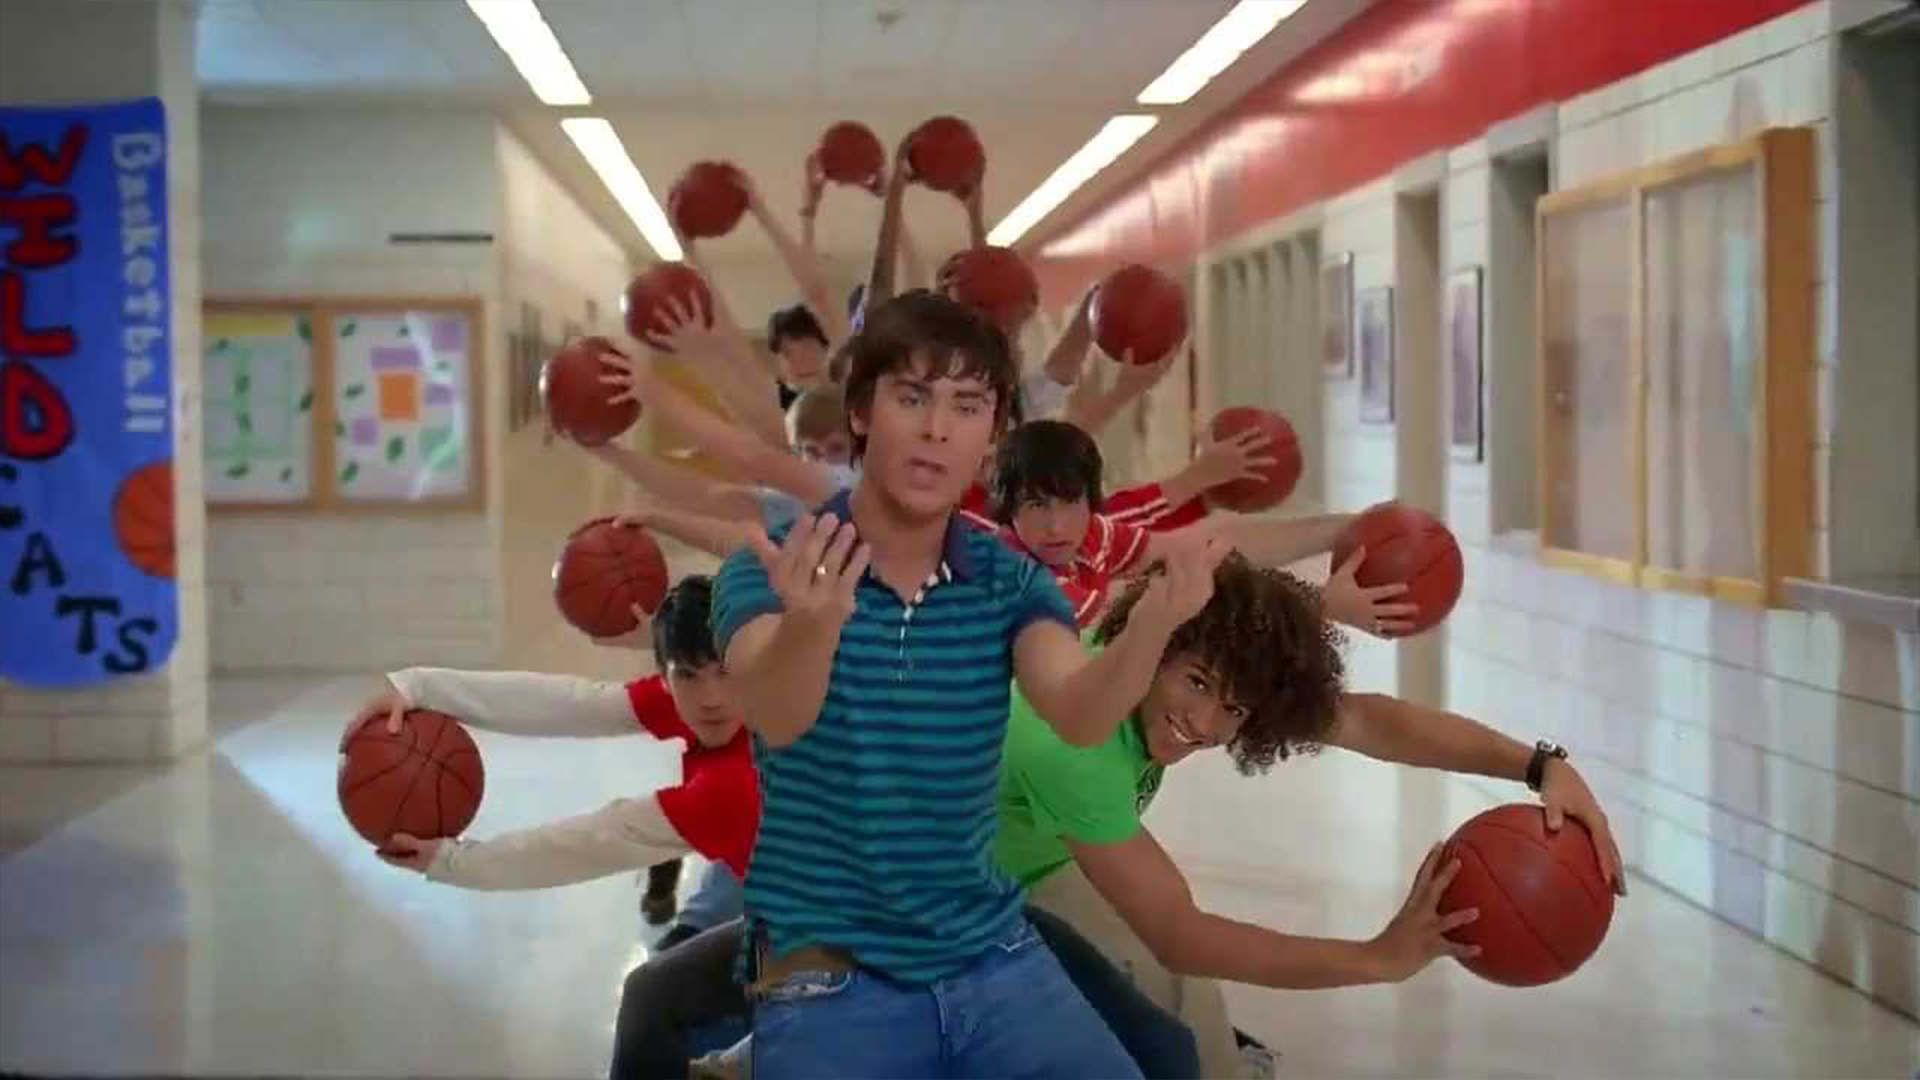 Basketball players in High School Musical 2